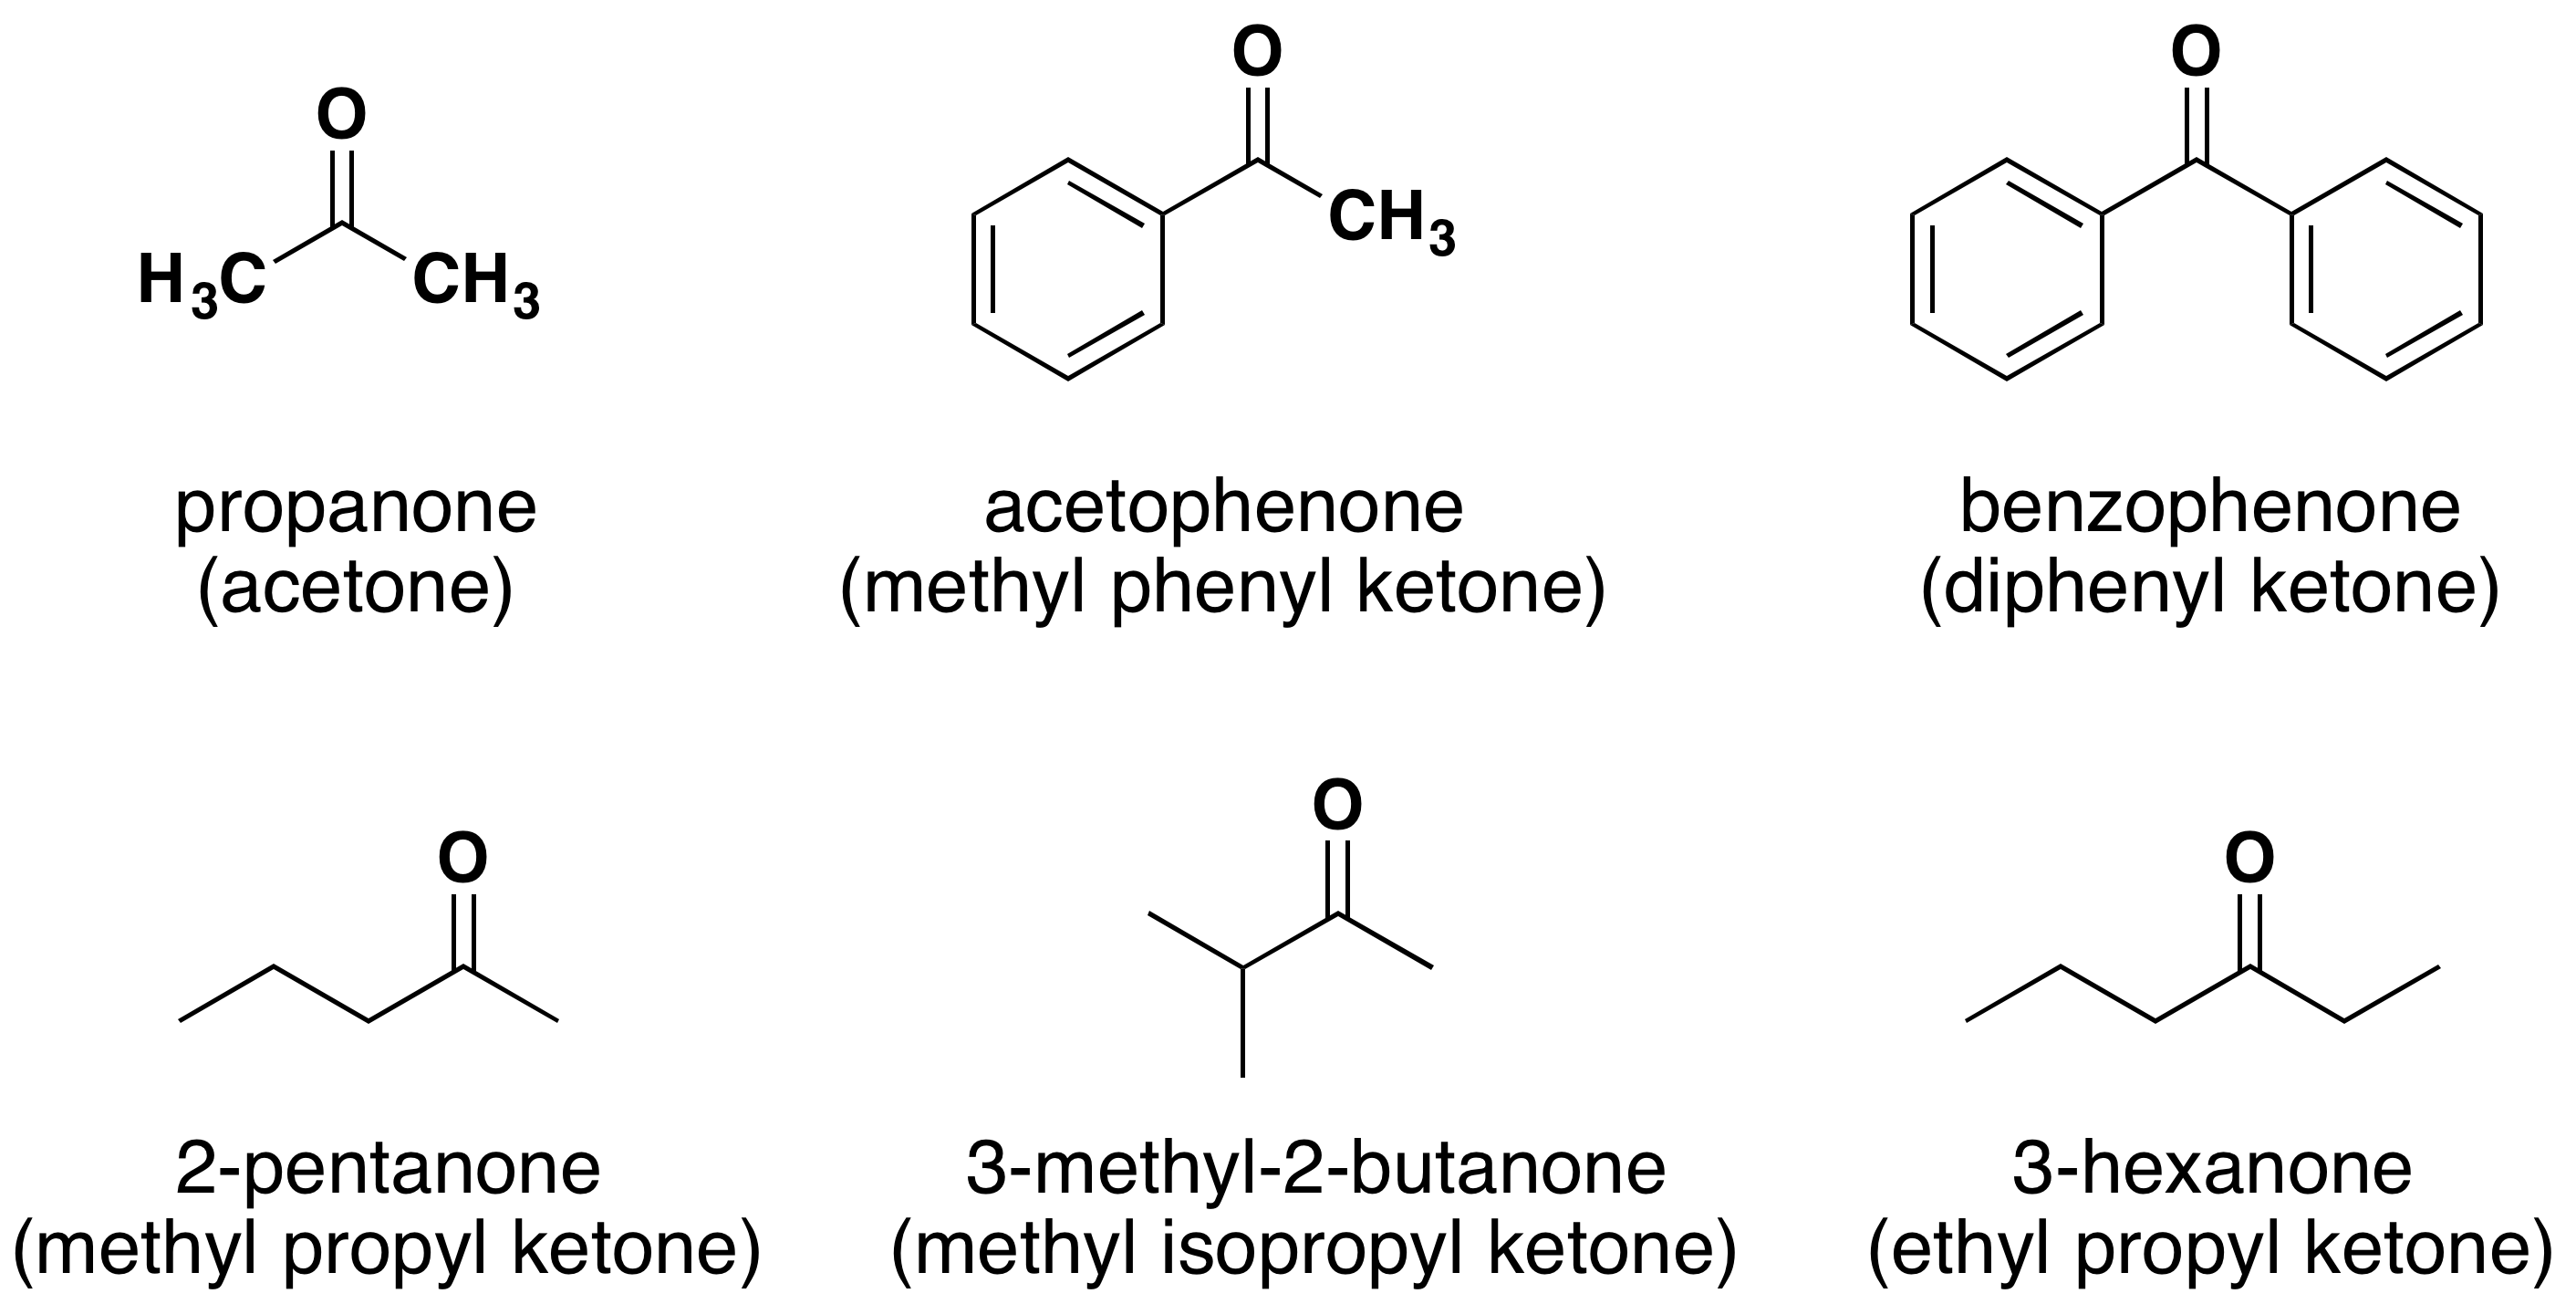 6 ketone structures. Top left to right: propanone, acetophenone and benzophenone. Bottom left to right: 2-penatanone, 3-methyl-2-butanone and 3-hexanone.